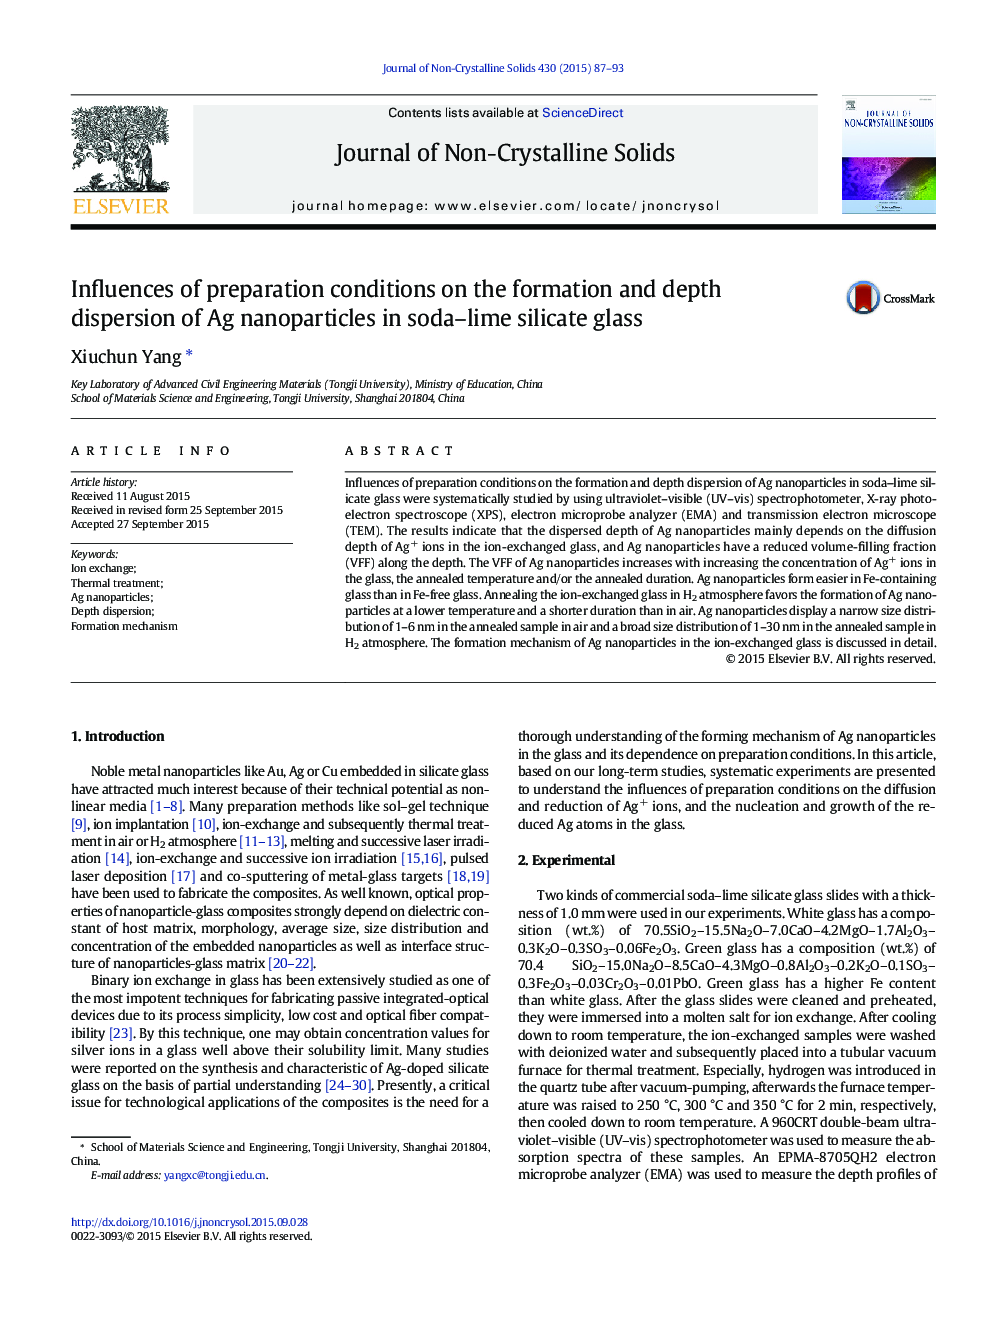 Influences of preparation conditions on the formation and depth dispersion of Ag nanoparticles in soda-lime silicate glass